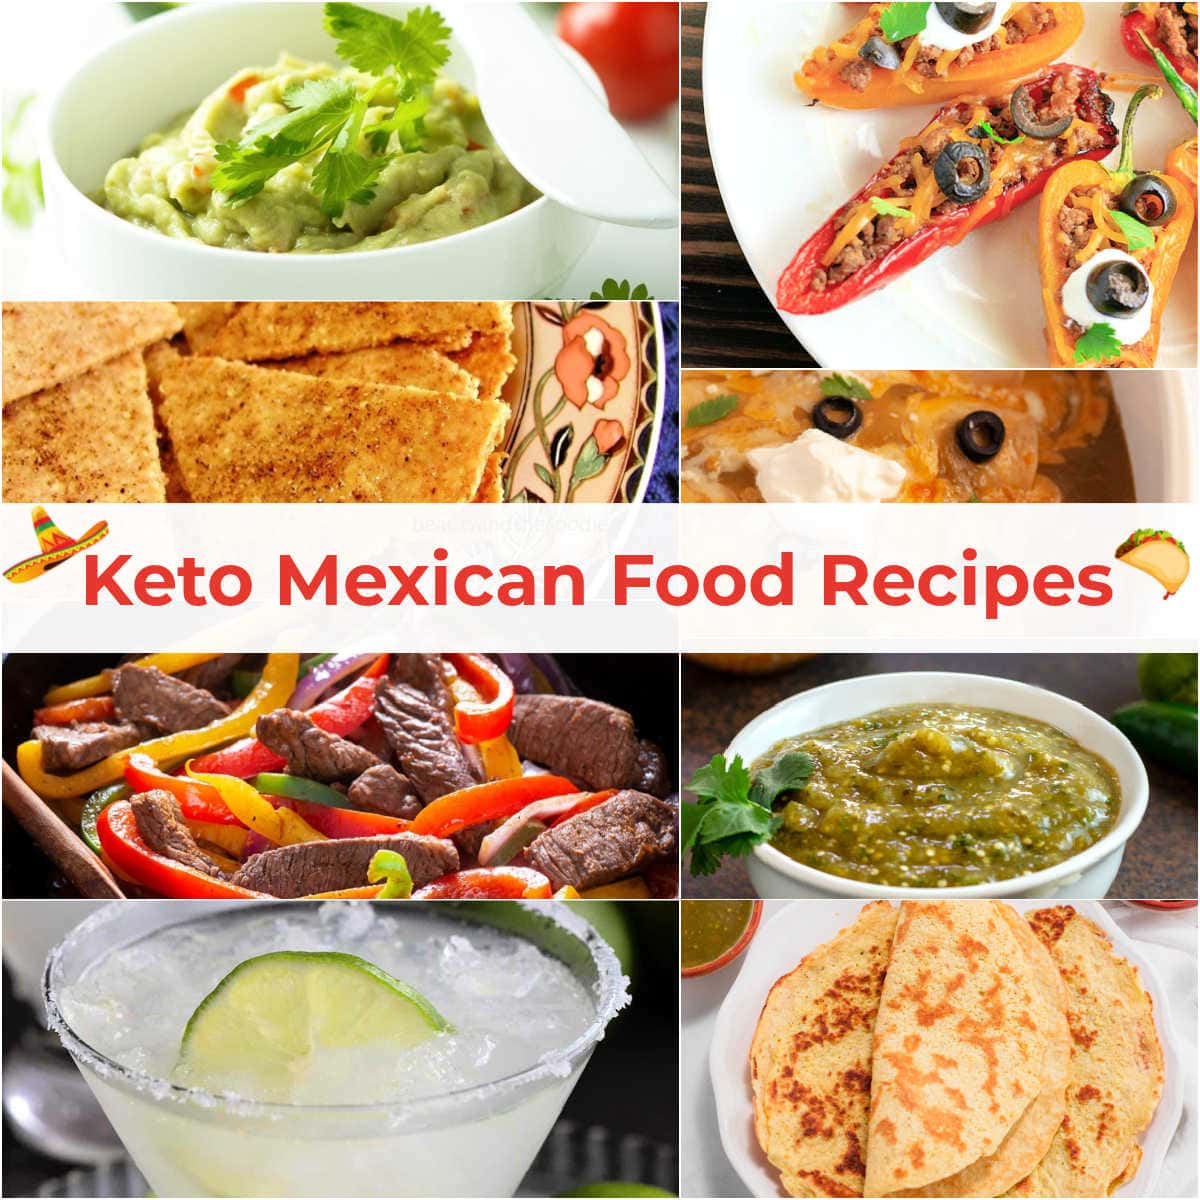 A collection of low carb Mexican food dishes